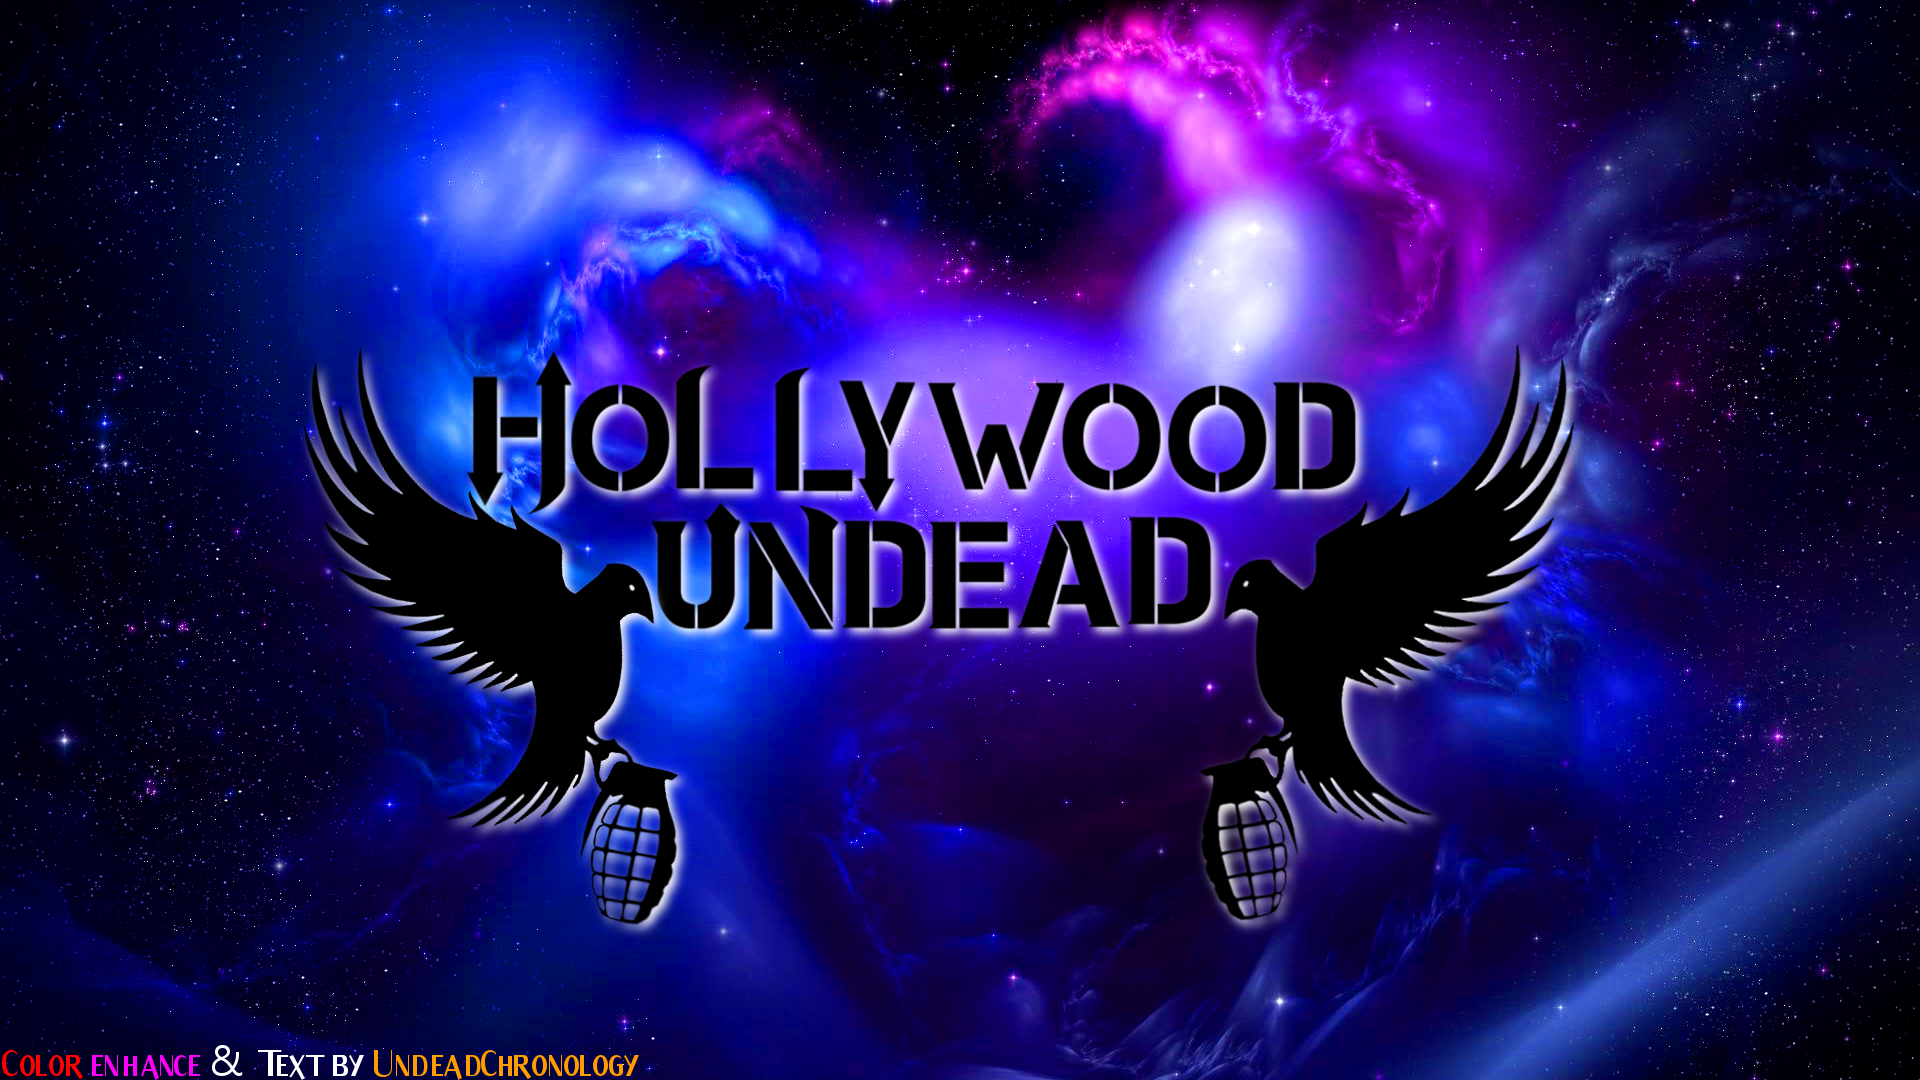  wallpaper other 2014 2015 dcfempx another hollywood undead wallpaper